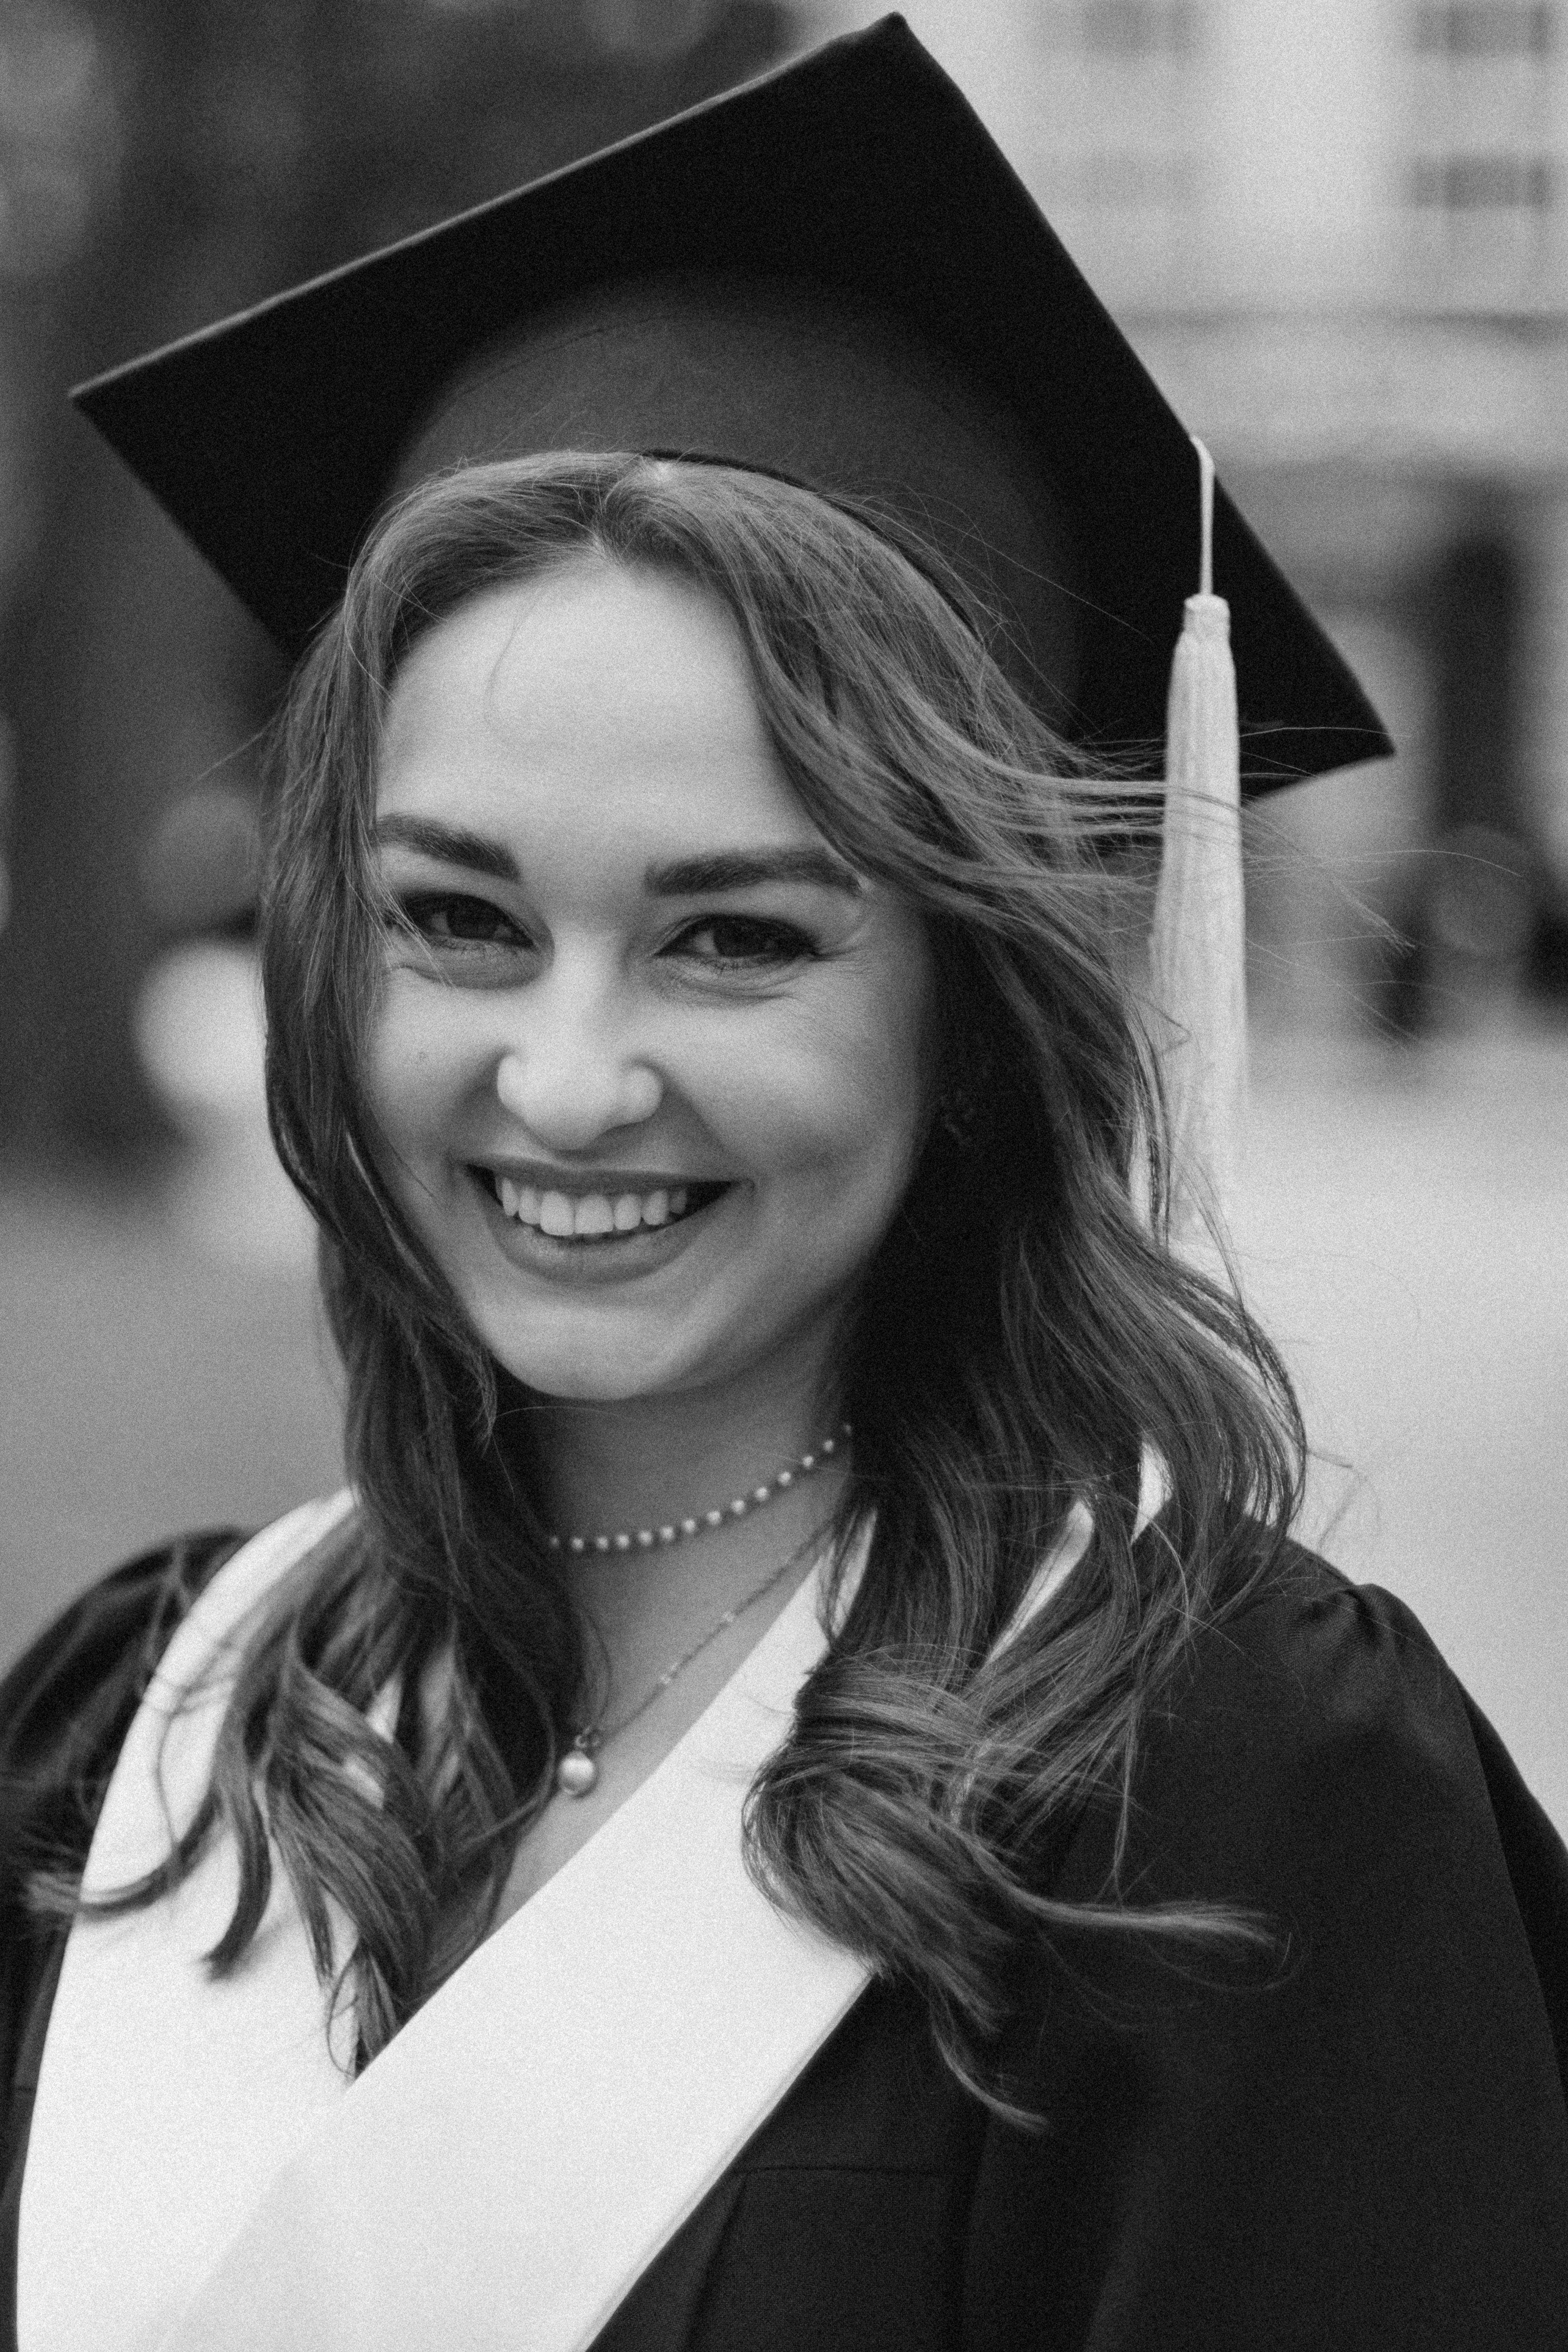 A woman smiling during graduation | Source: Pexels